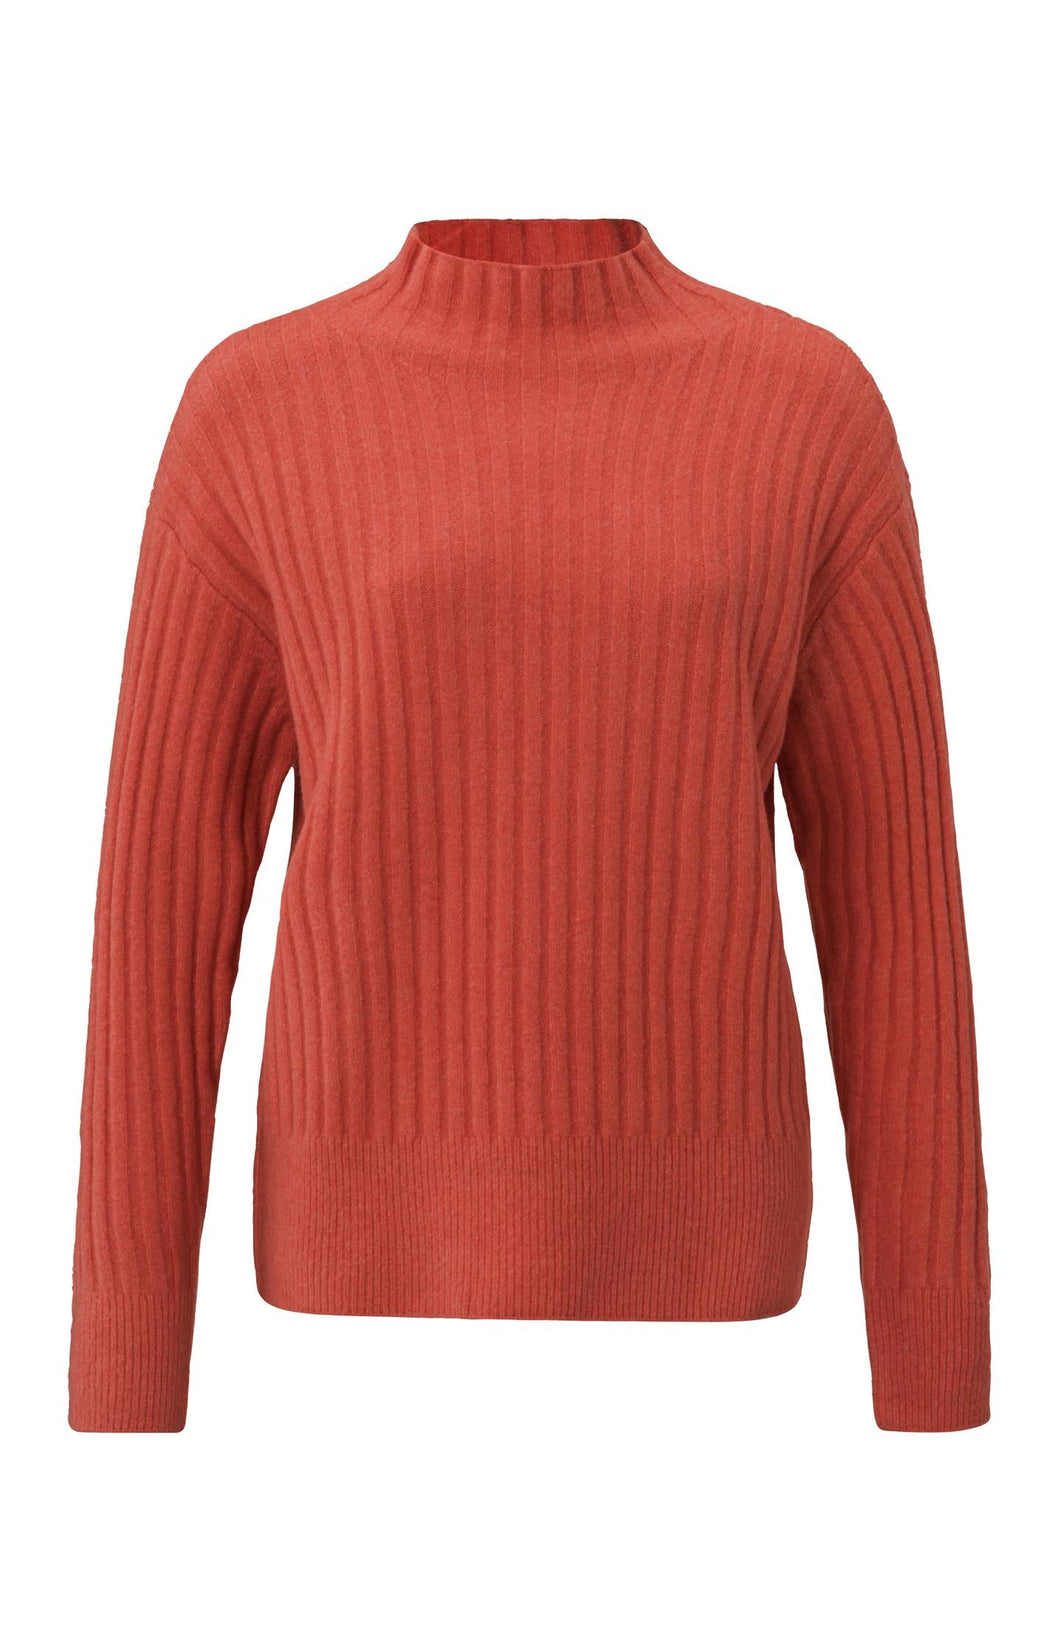 Sweater with turtleneck, long sleeves and ribbed details - Ochre Red Melange - Type: product